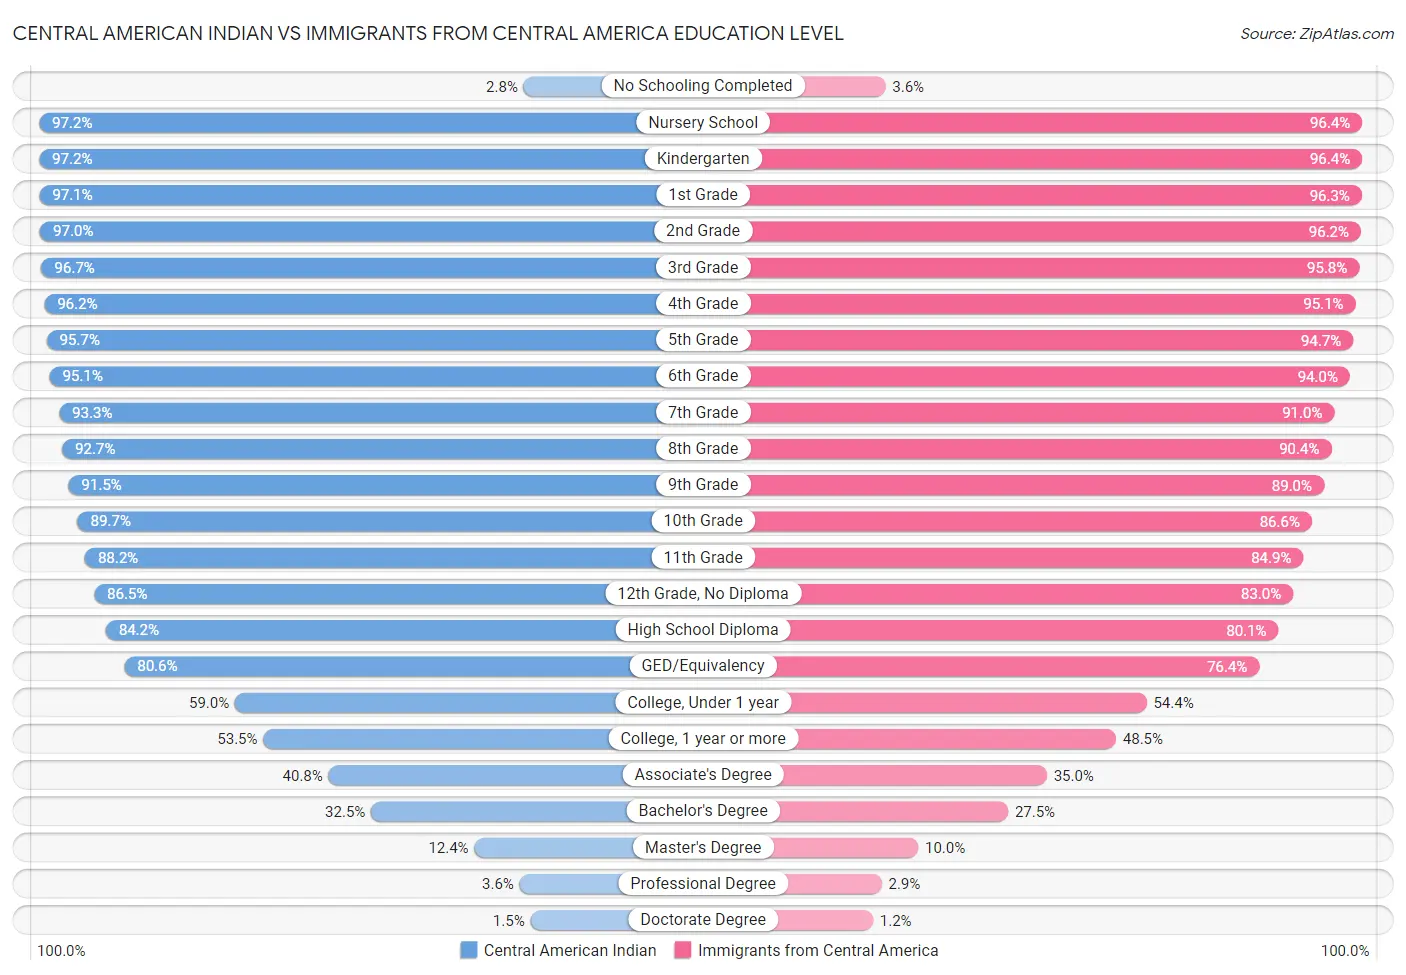 Central American Indian vs Immigrants from Central America Education Level